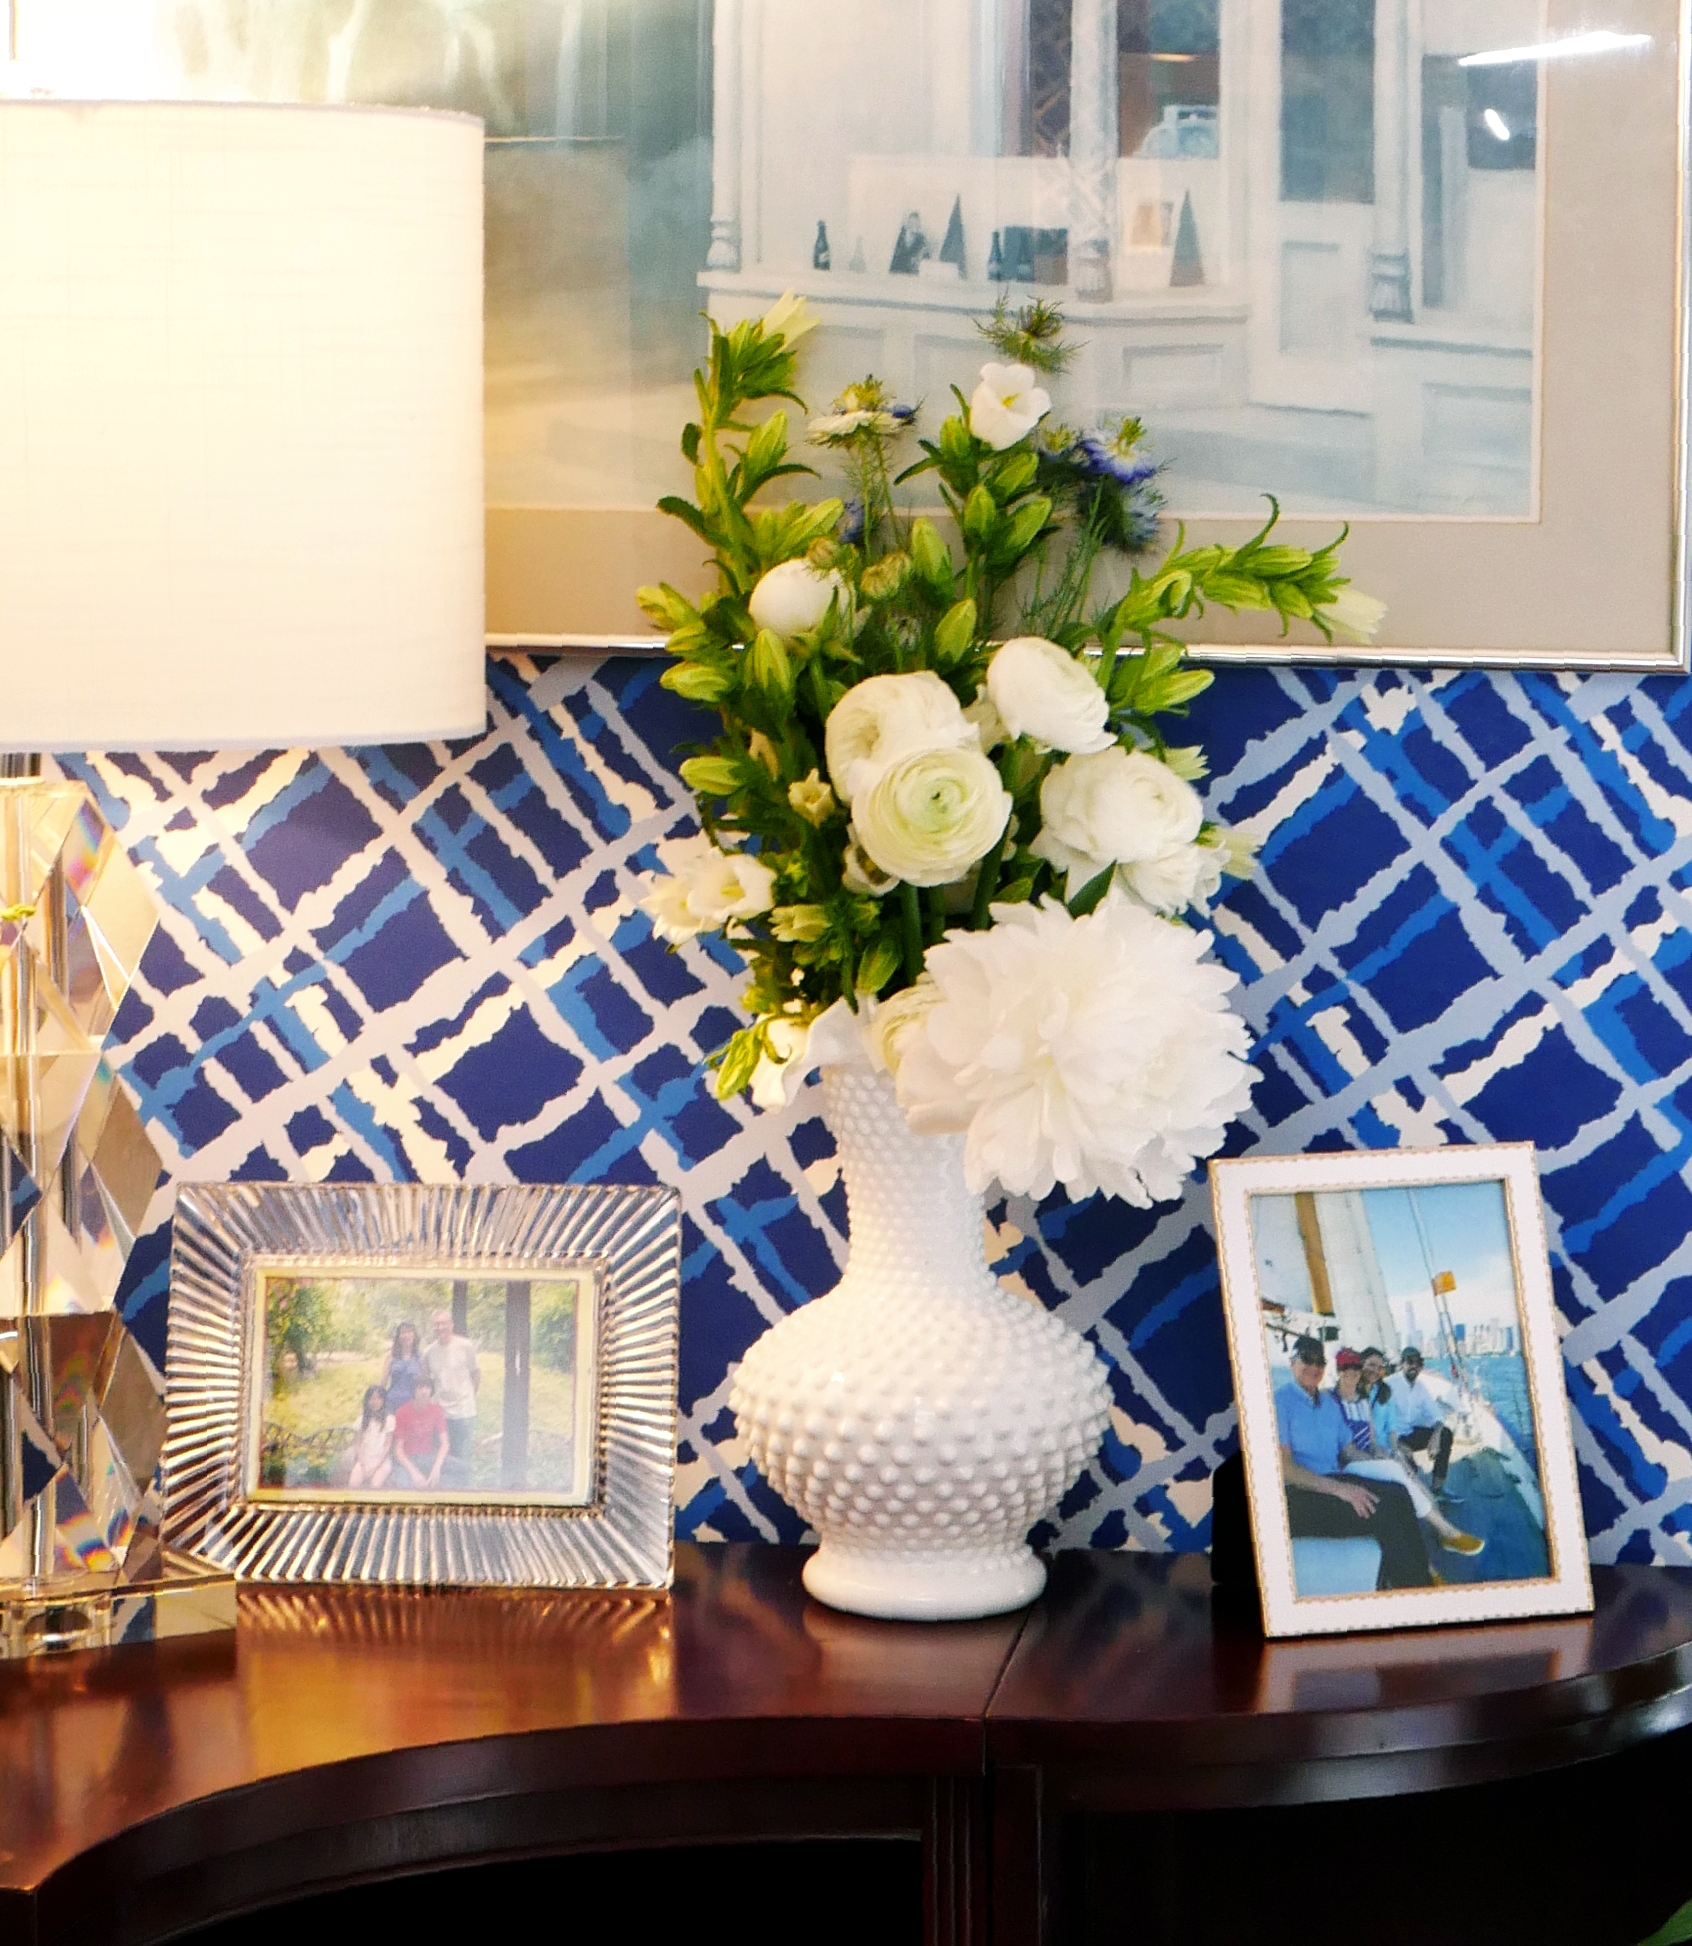 Details matter when transforming a room - See more on The Pillow Goddess blog!